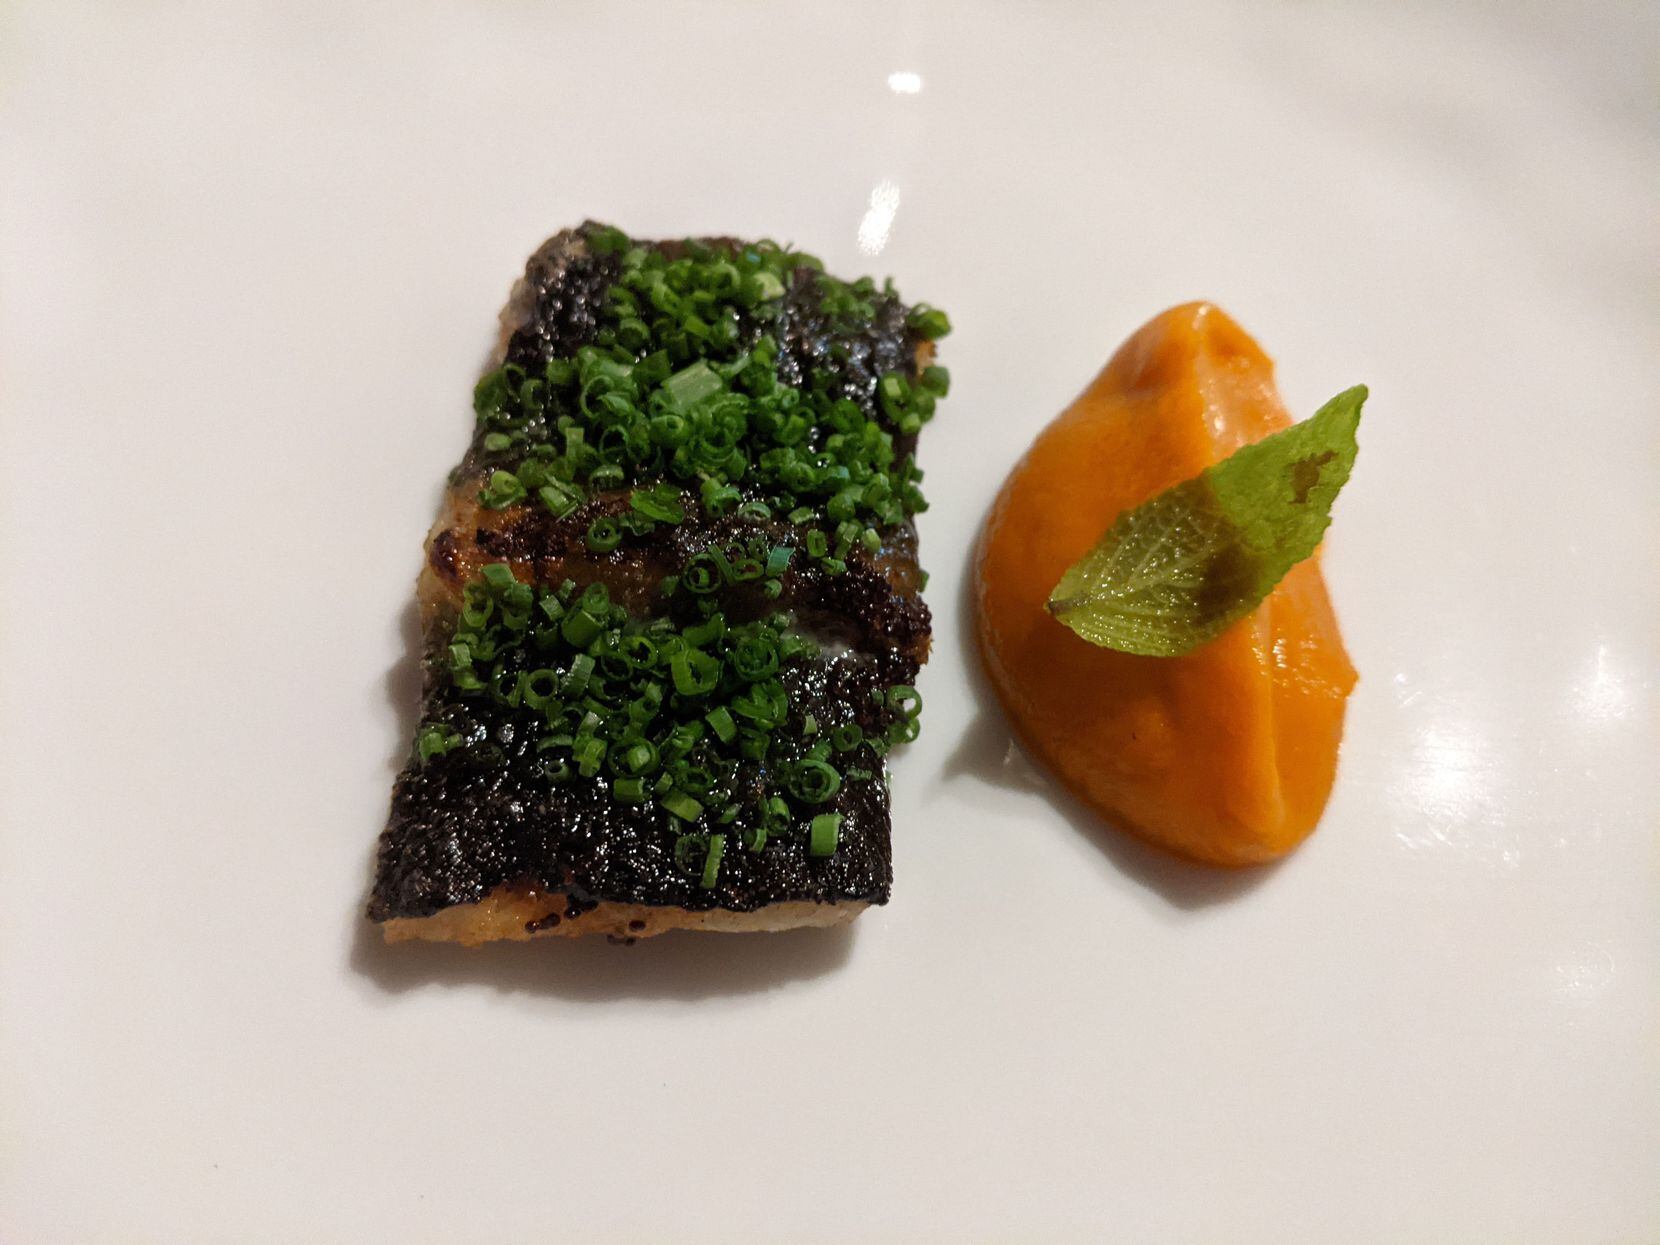 Grilled eel with lemon poppyseed gastrique, and a side of sweet potato puree at Carte Blanche.